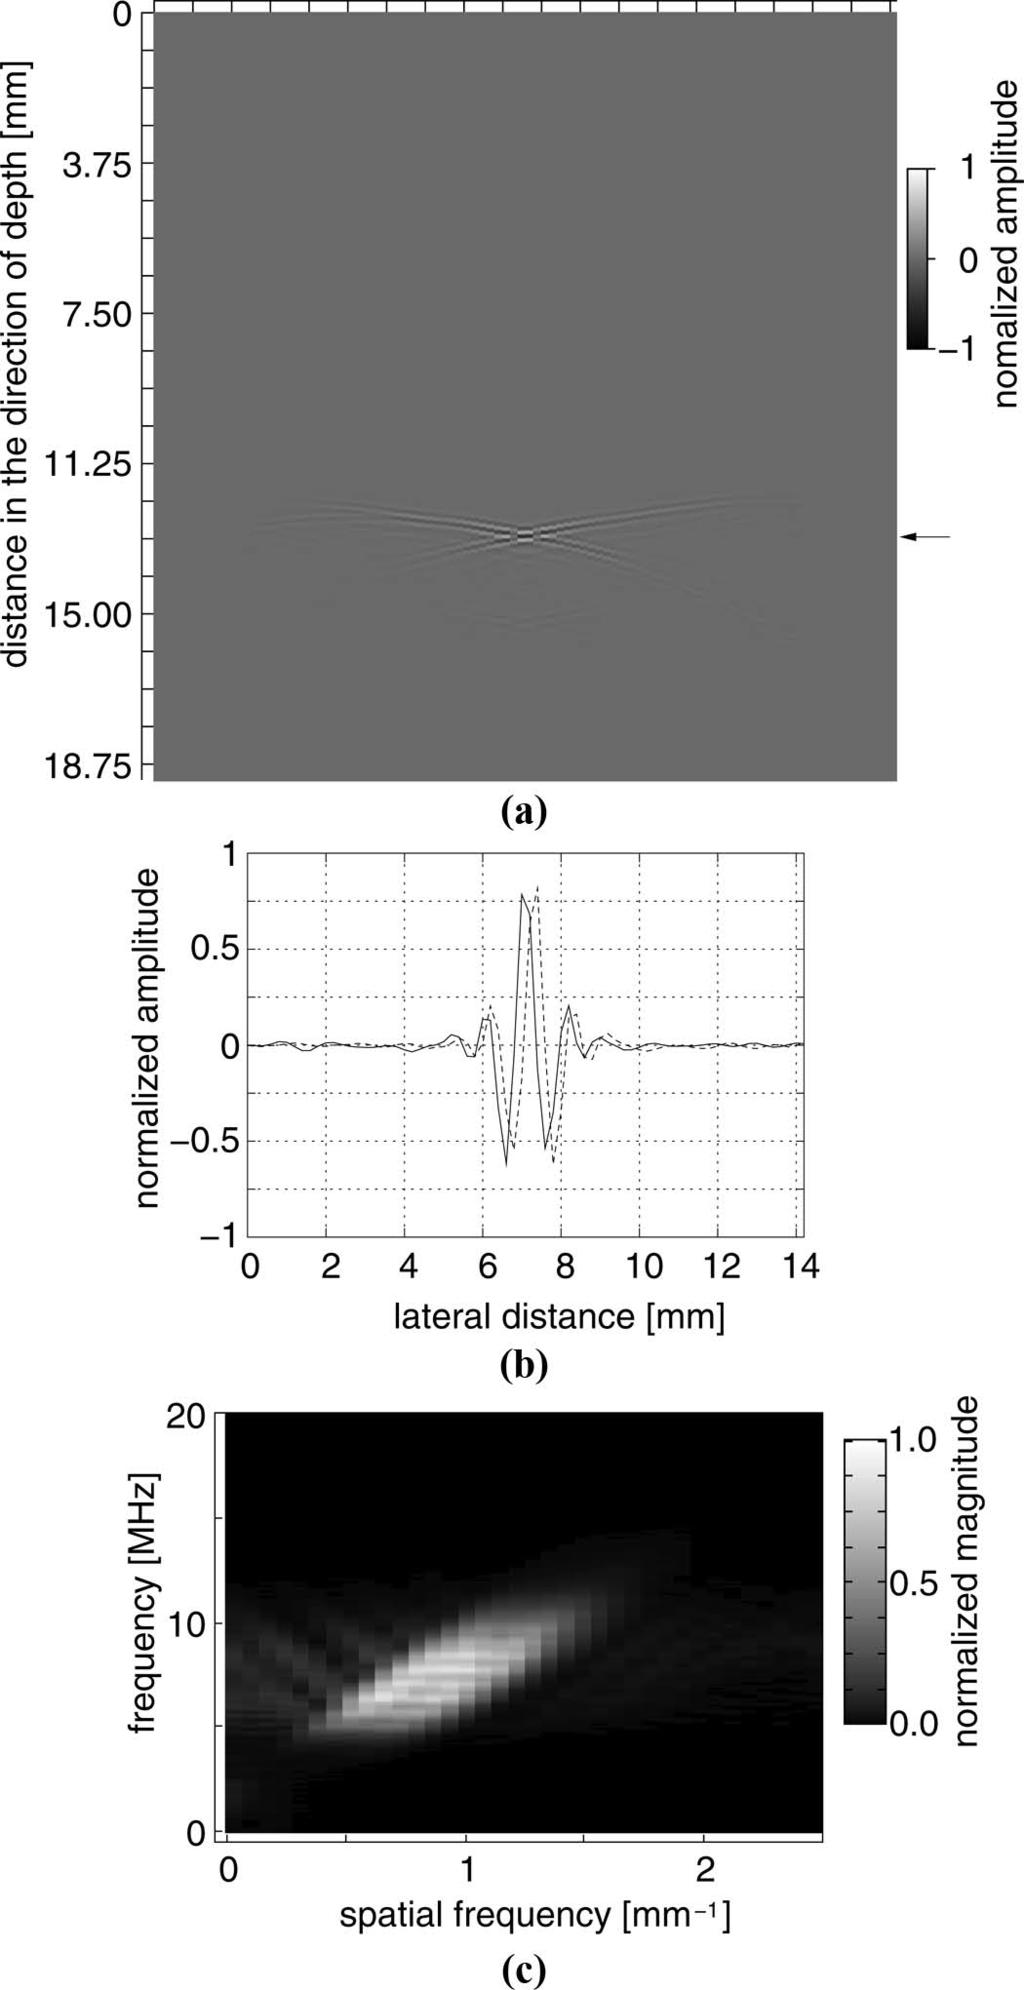 hasegawa and kanai: phase-sensitive lateral motion estimator phantom study 455 respectively. As shown in Fig.